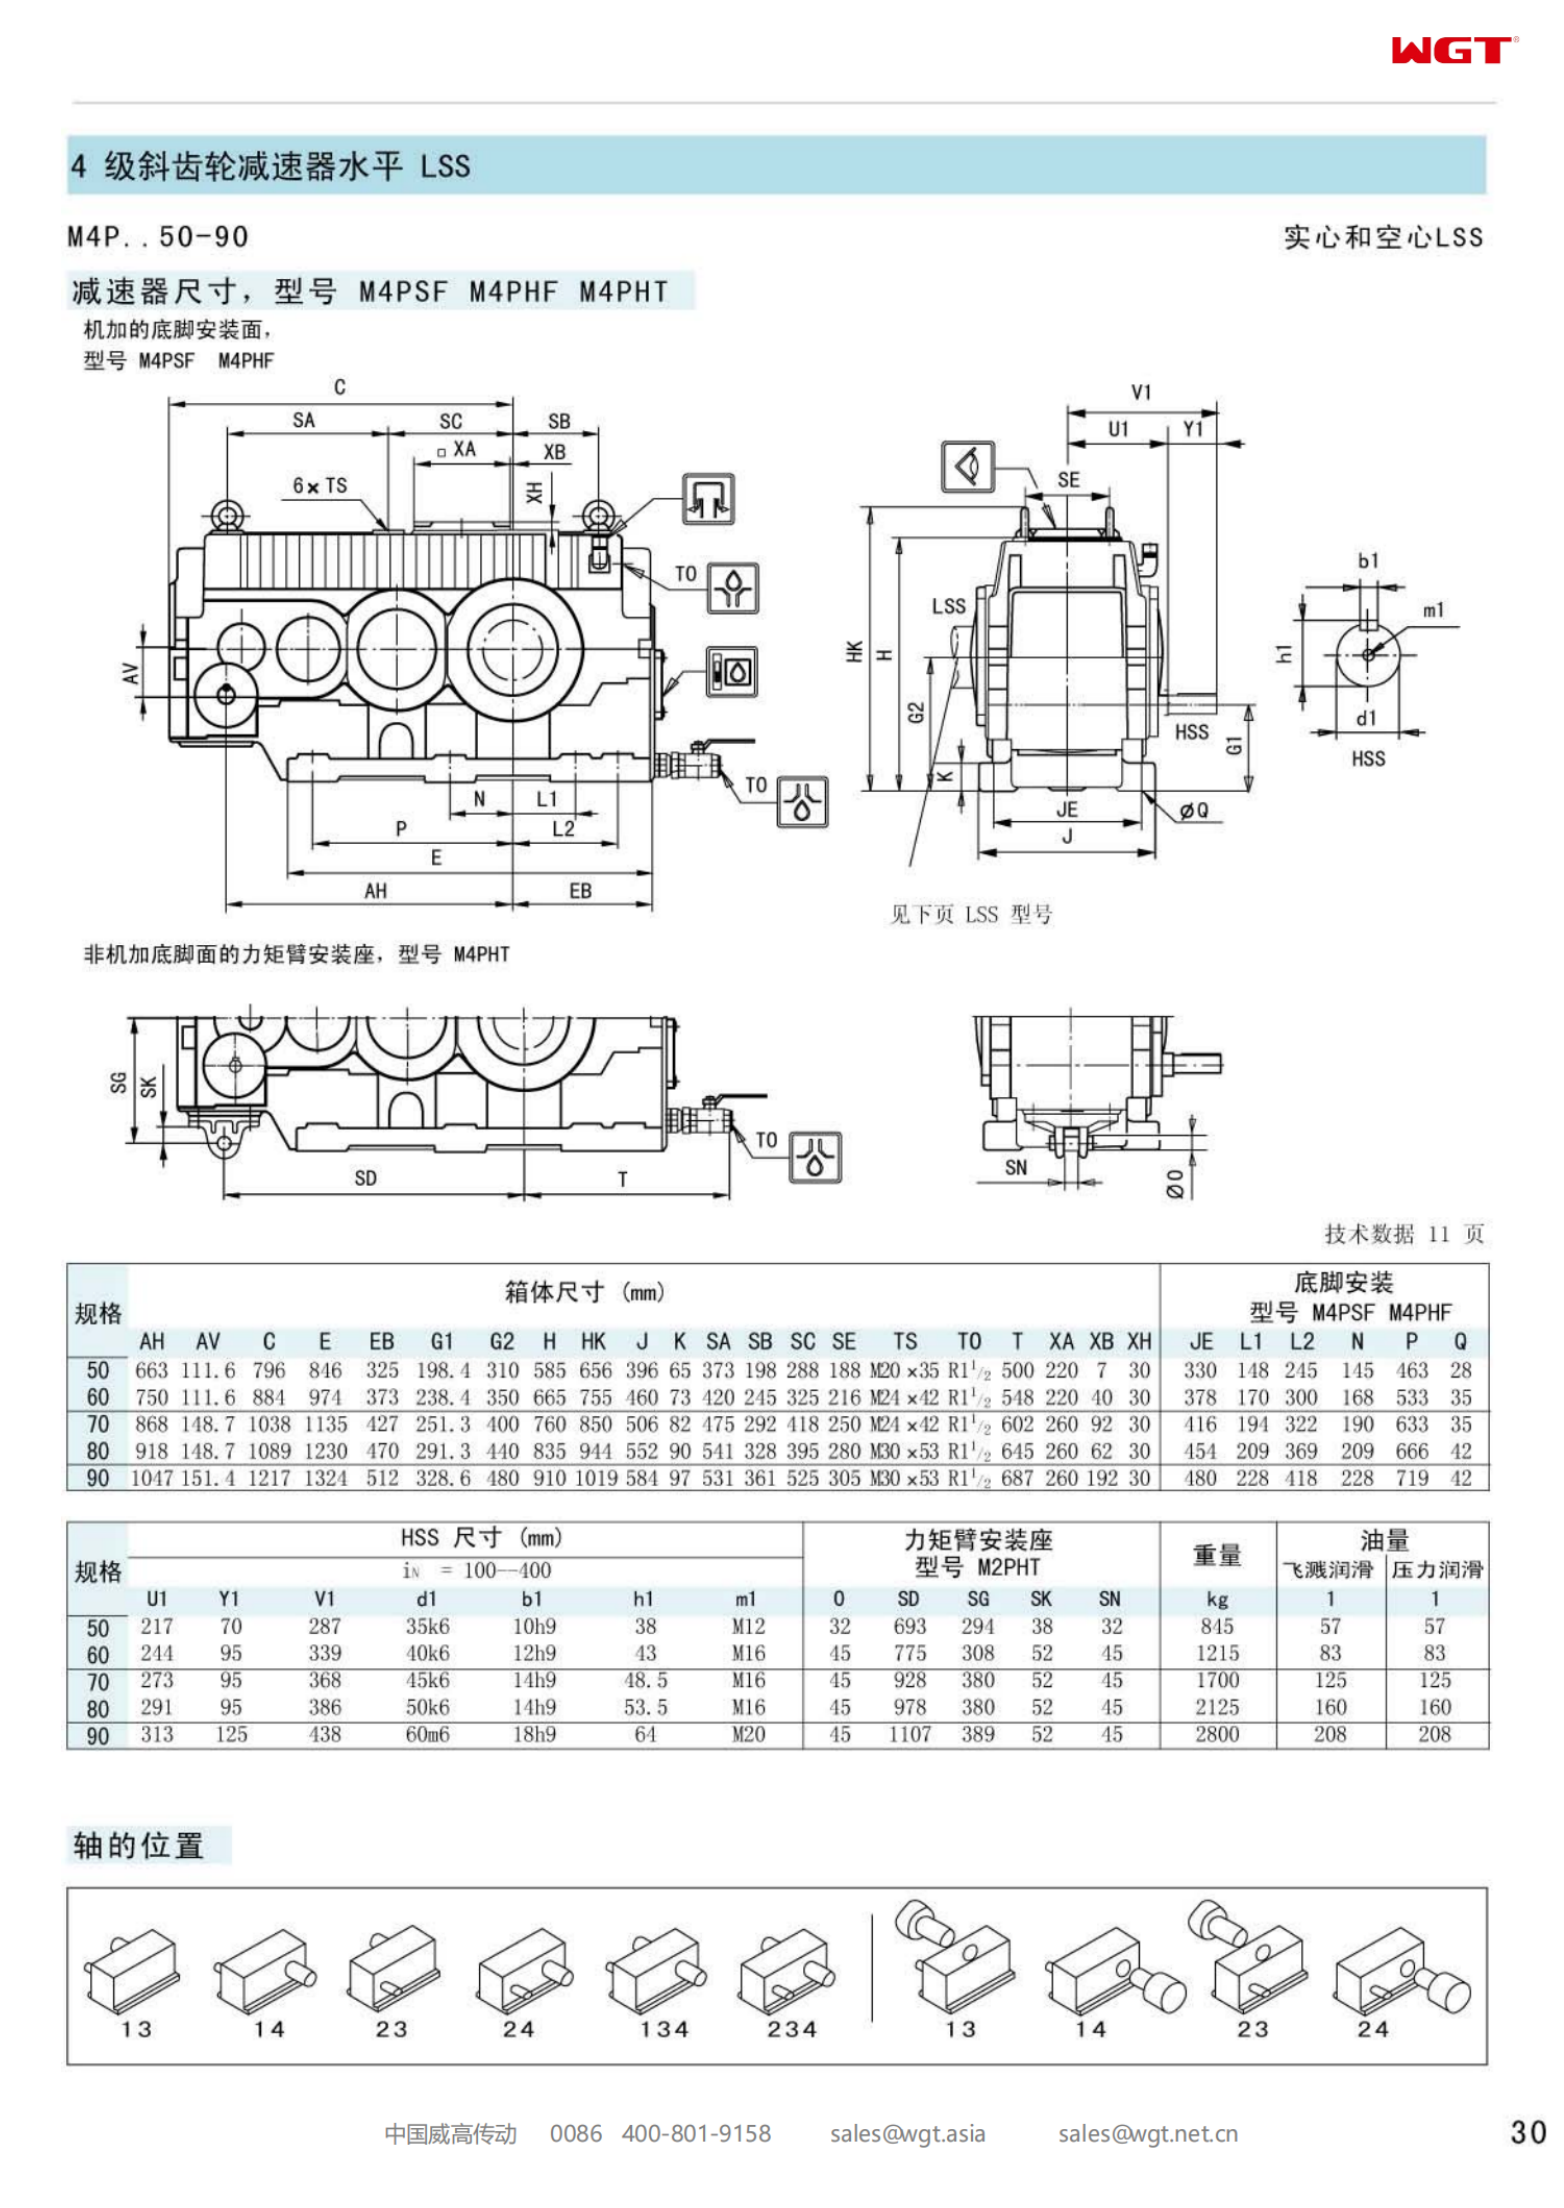 M4PHF50 Replace_SEW_M_Series Gearbox